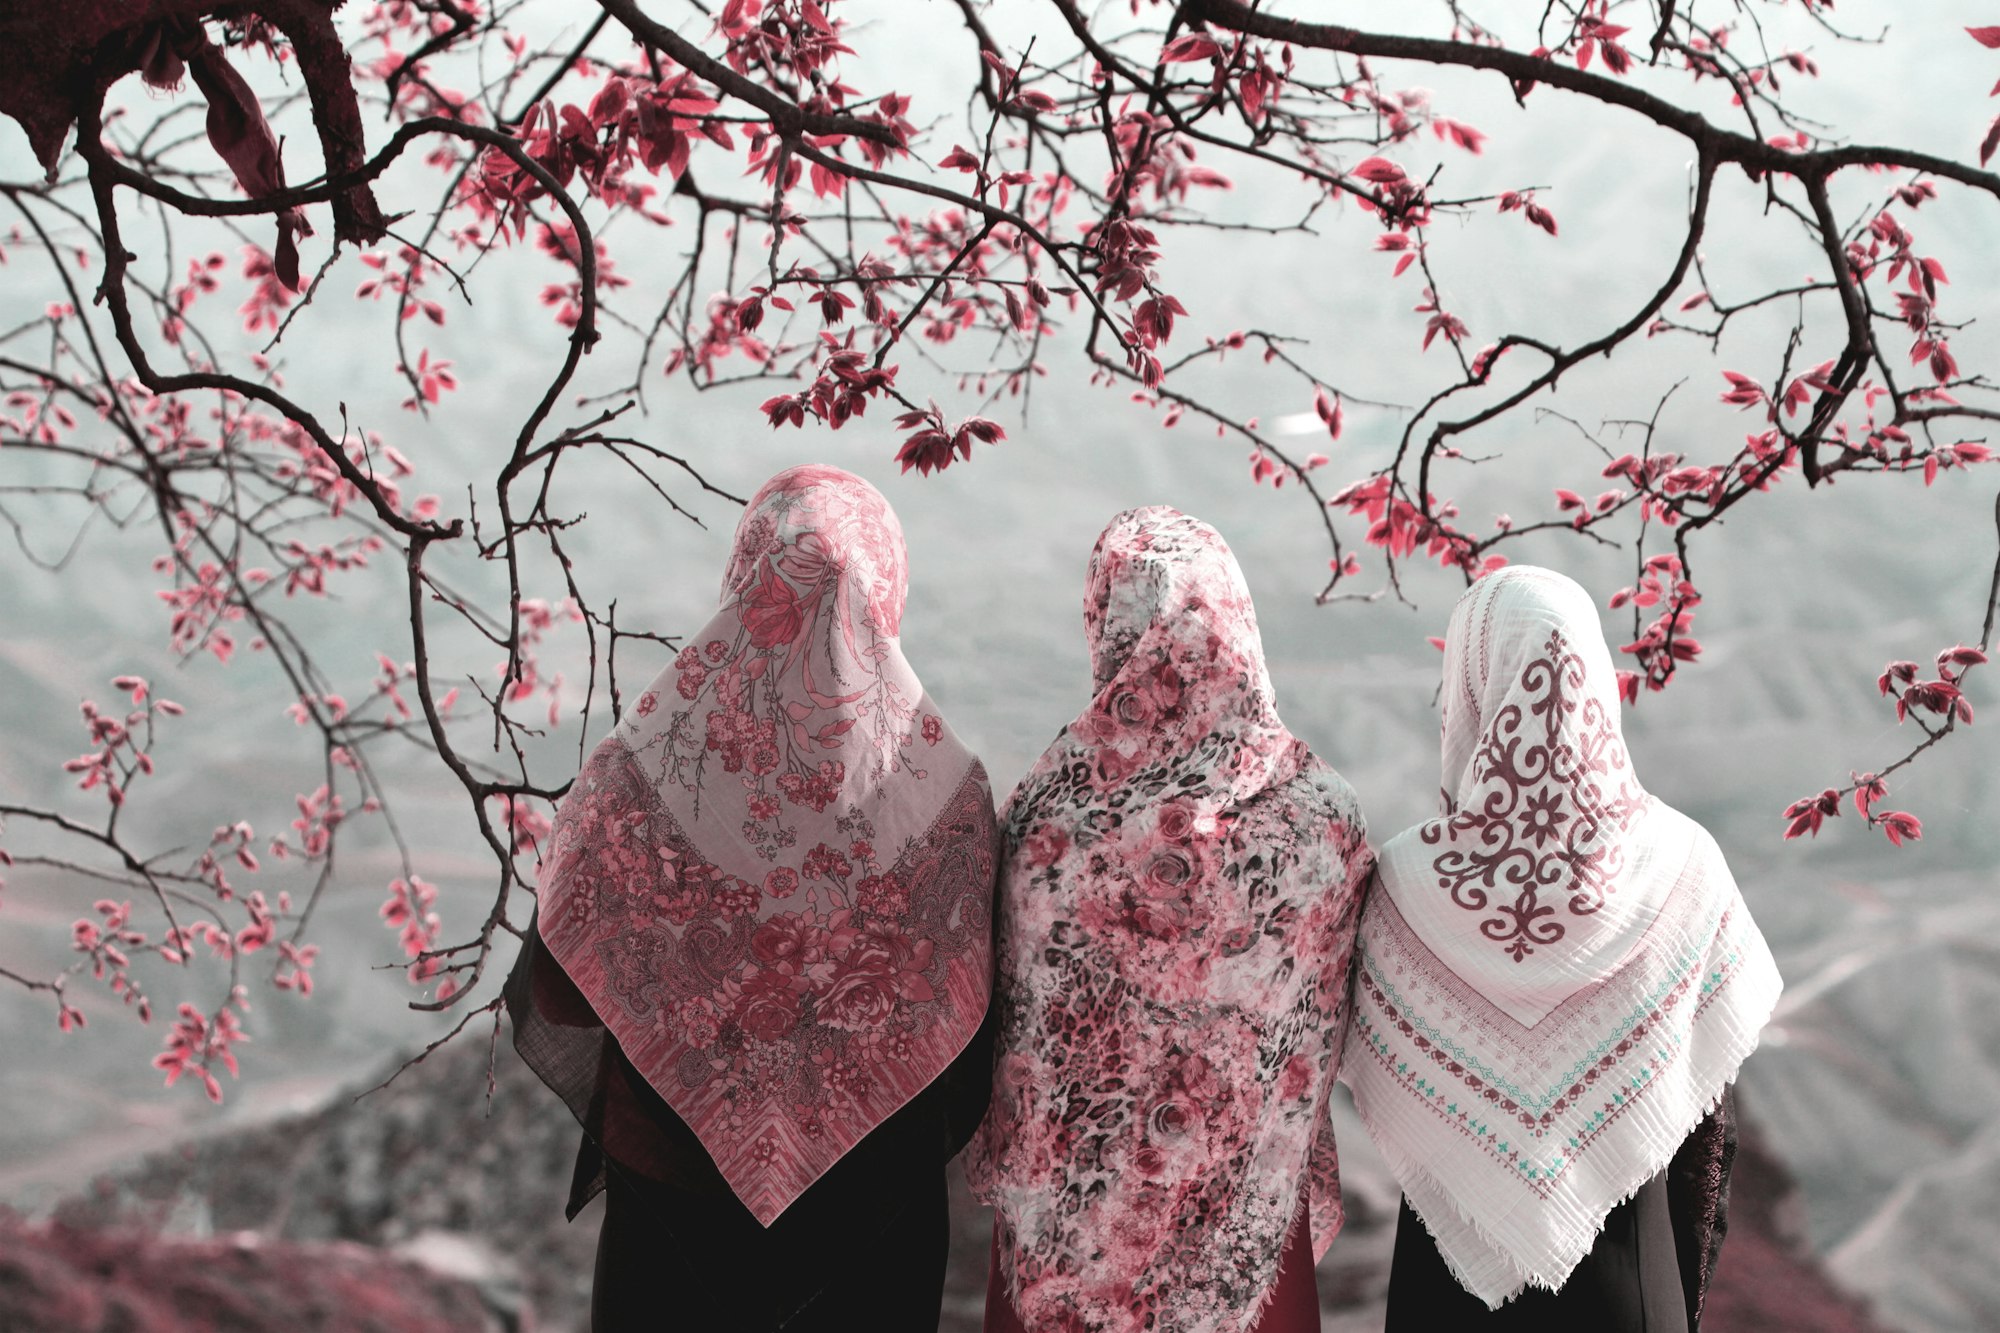 Benefits of the Hijab: 5 That Will Surprise You